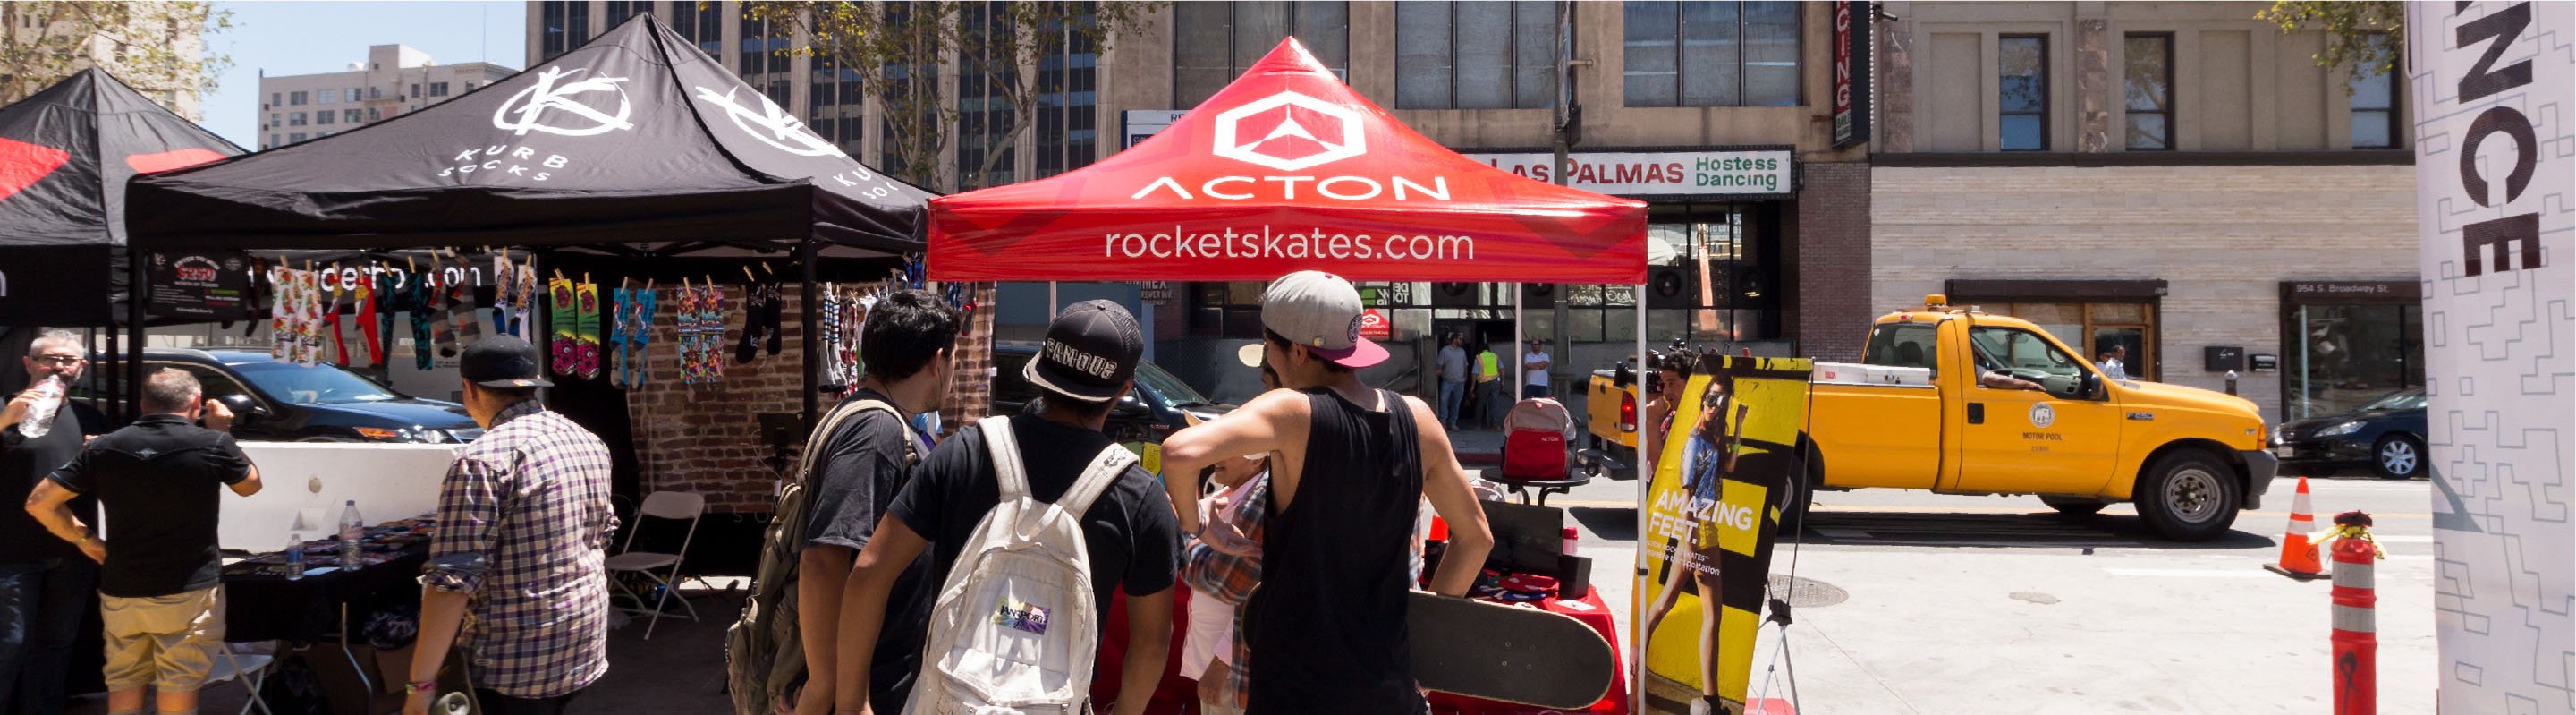 acton rocket skates bronze package with custom printed canopy tent top